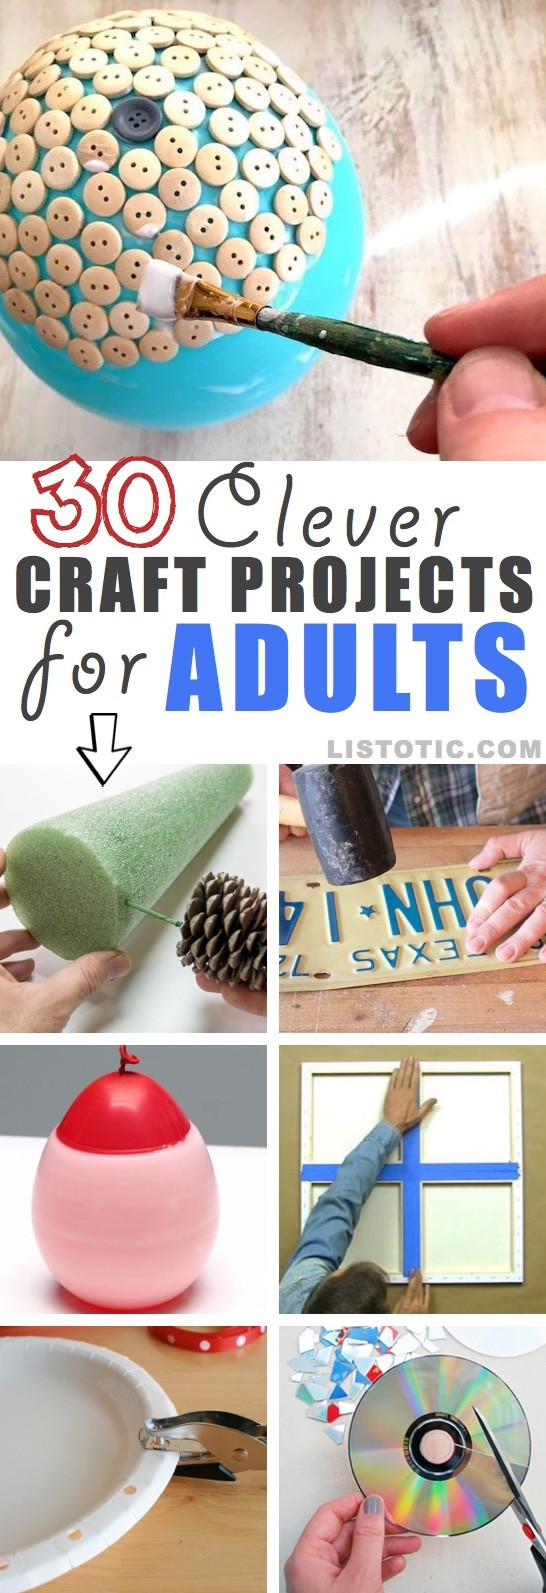 Simple Craft Ideas For Adults
 30 Easy Craft Ideas That Will Spark Your Creativity DIY